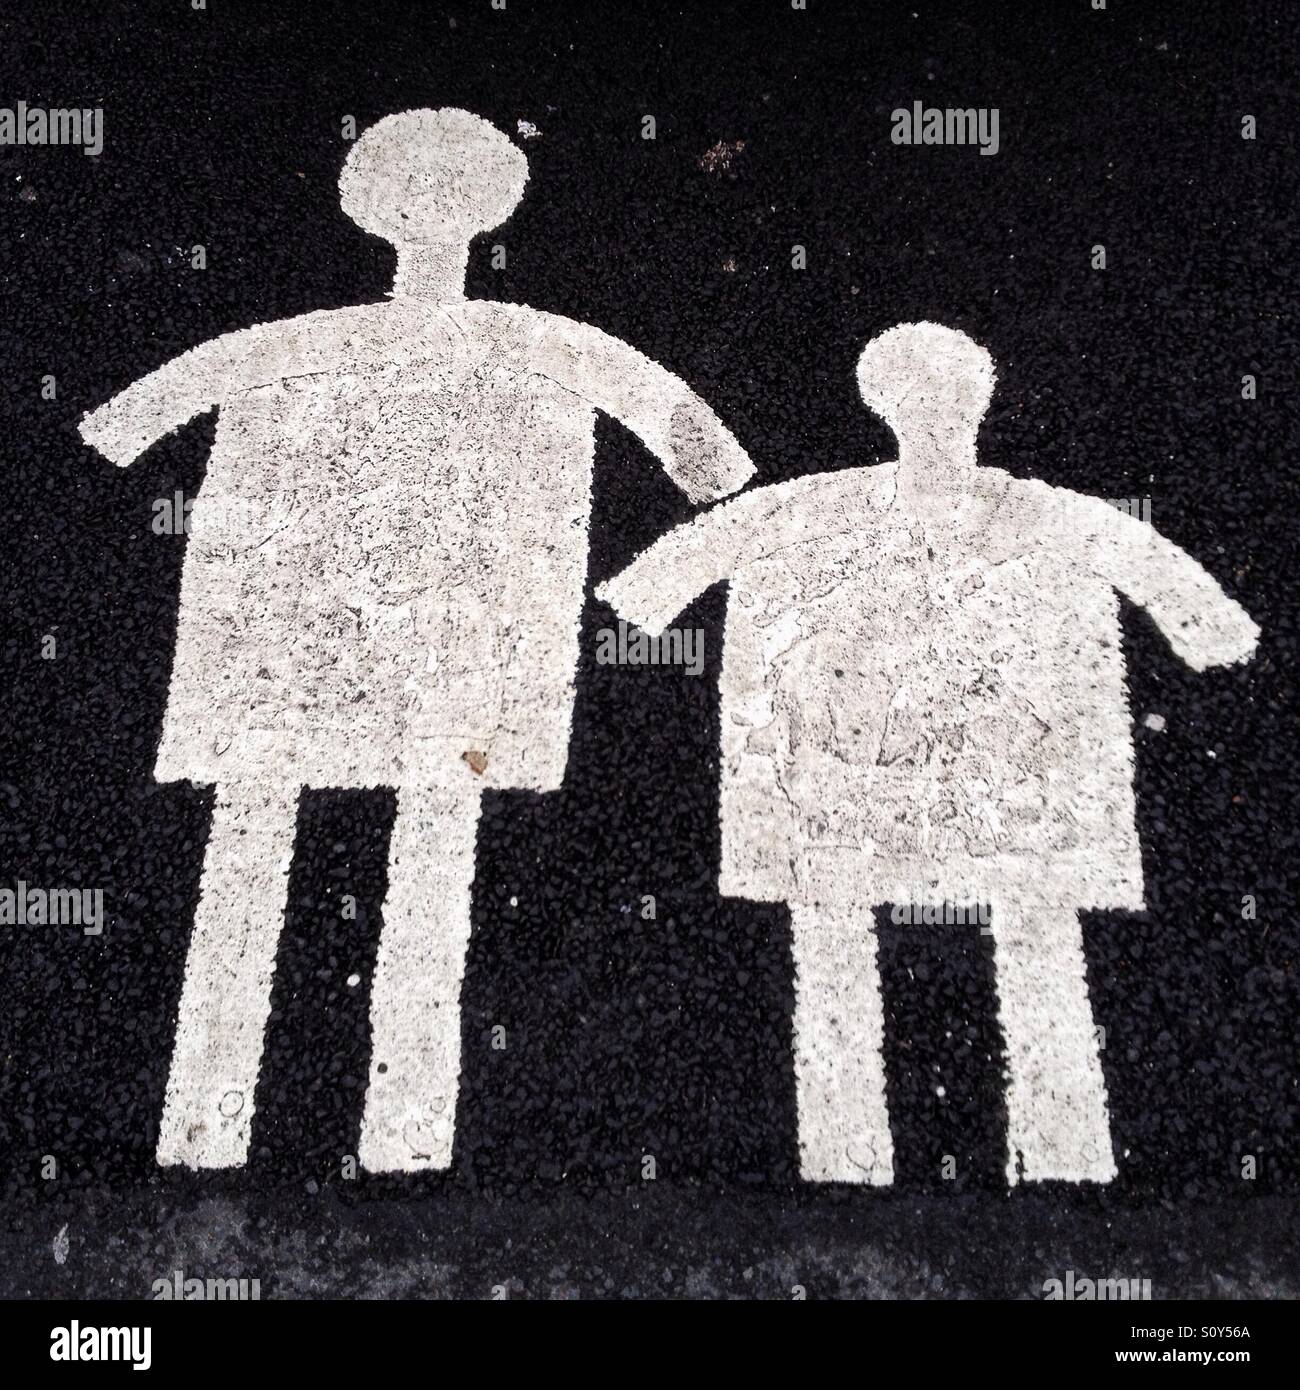 Obese mother and child markings in car park bay Stock Photo